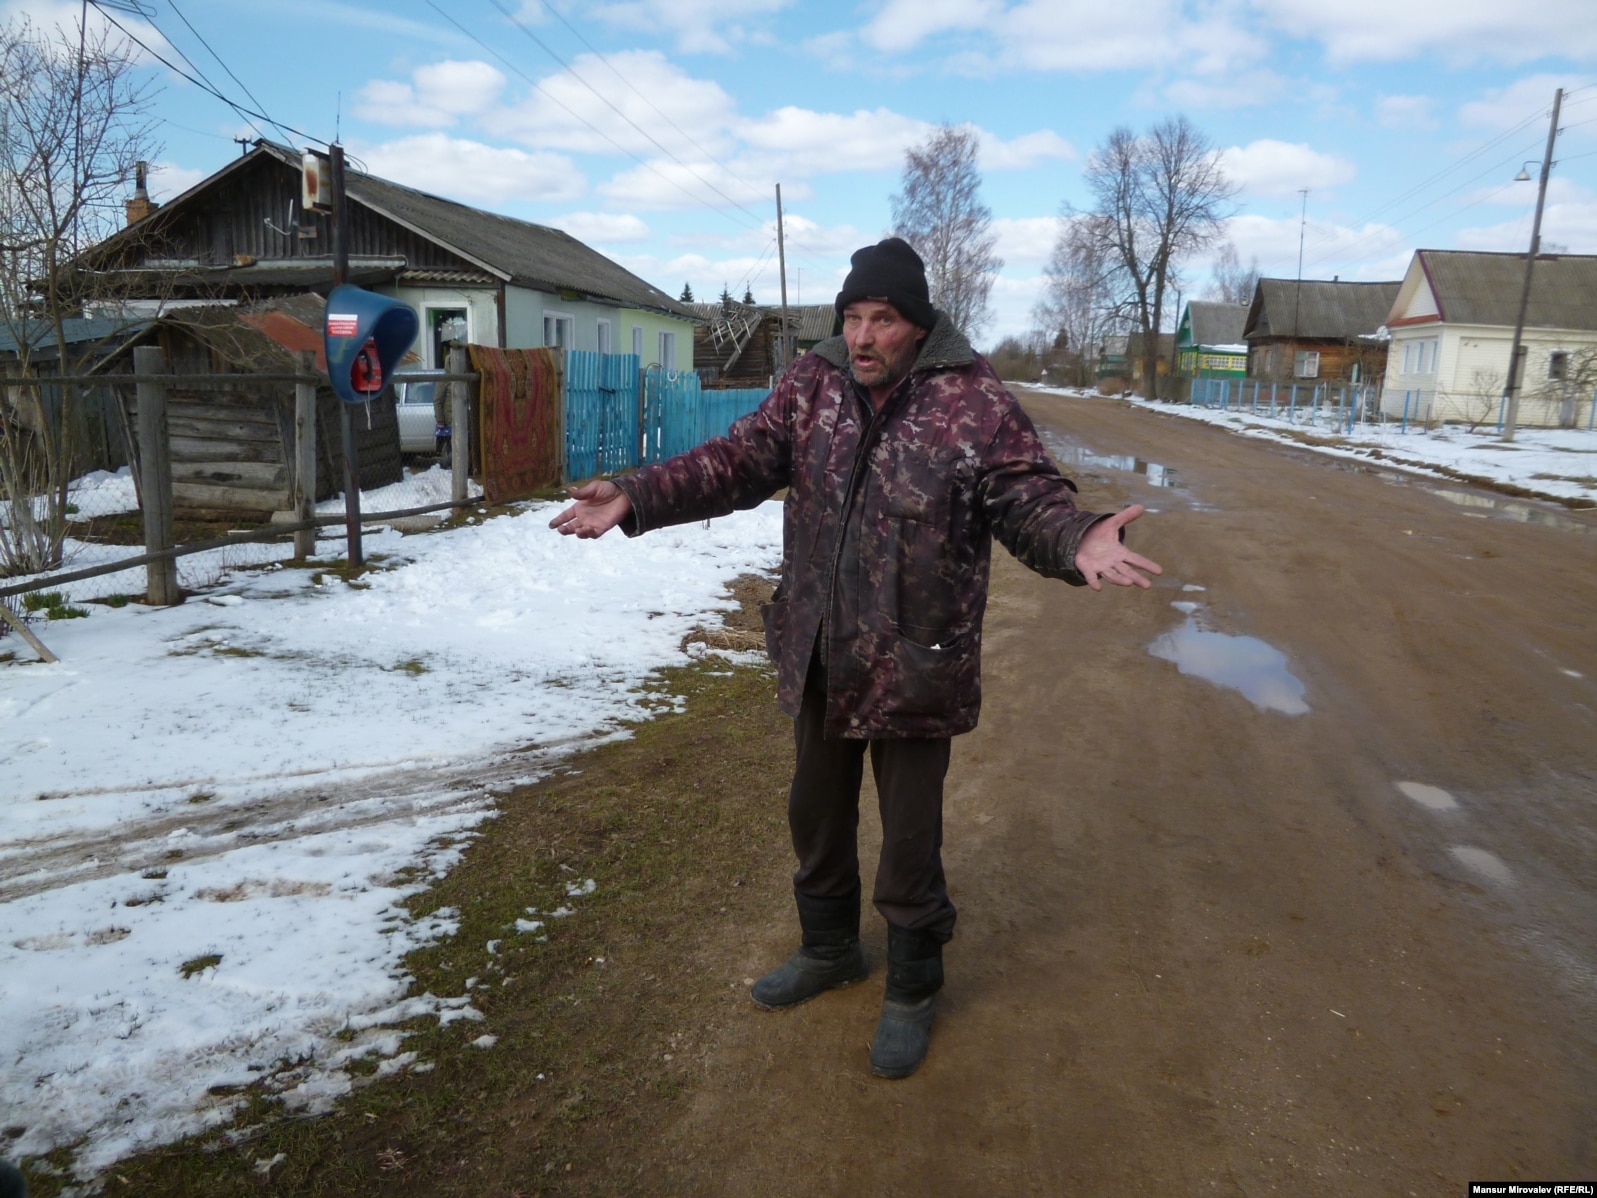 In the village of Nesterovo in the Tver region, Vladimir (who preferred not to give his last name) bemoans the collapse of the countryside economy.